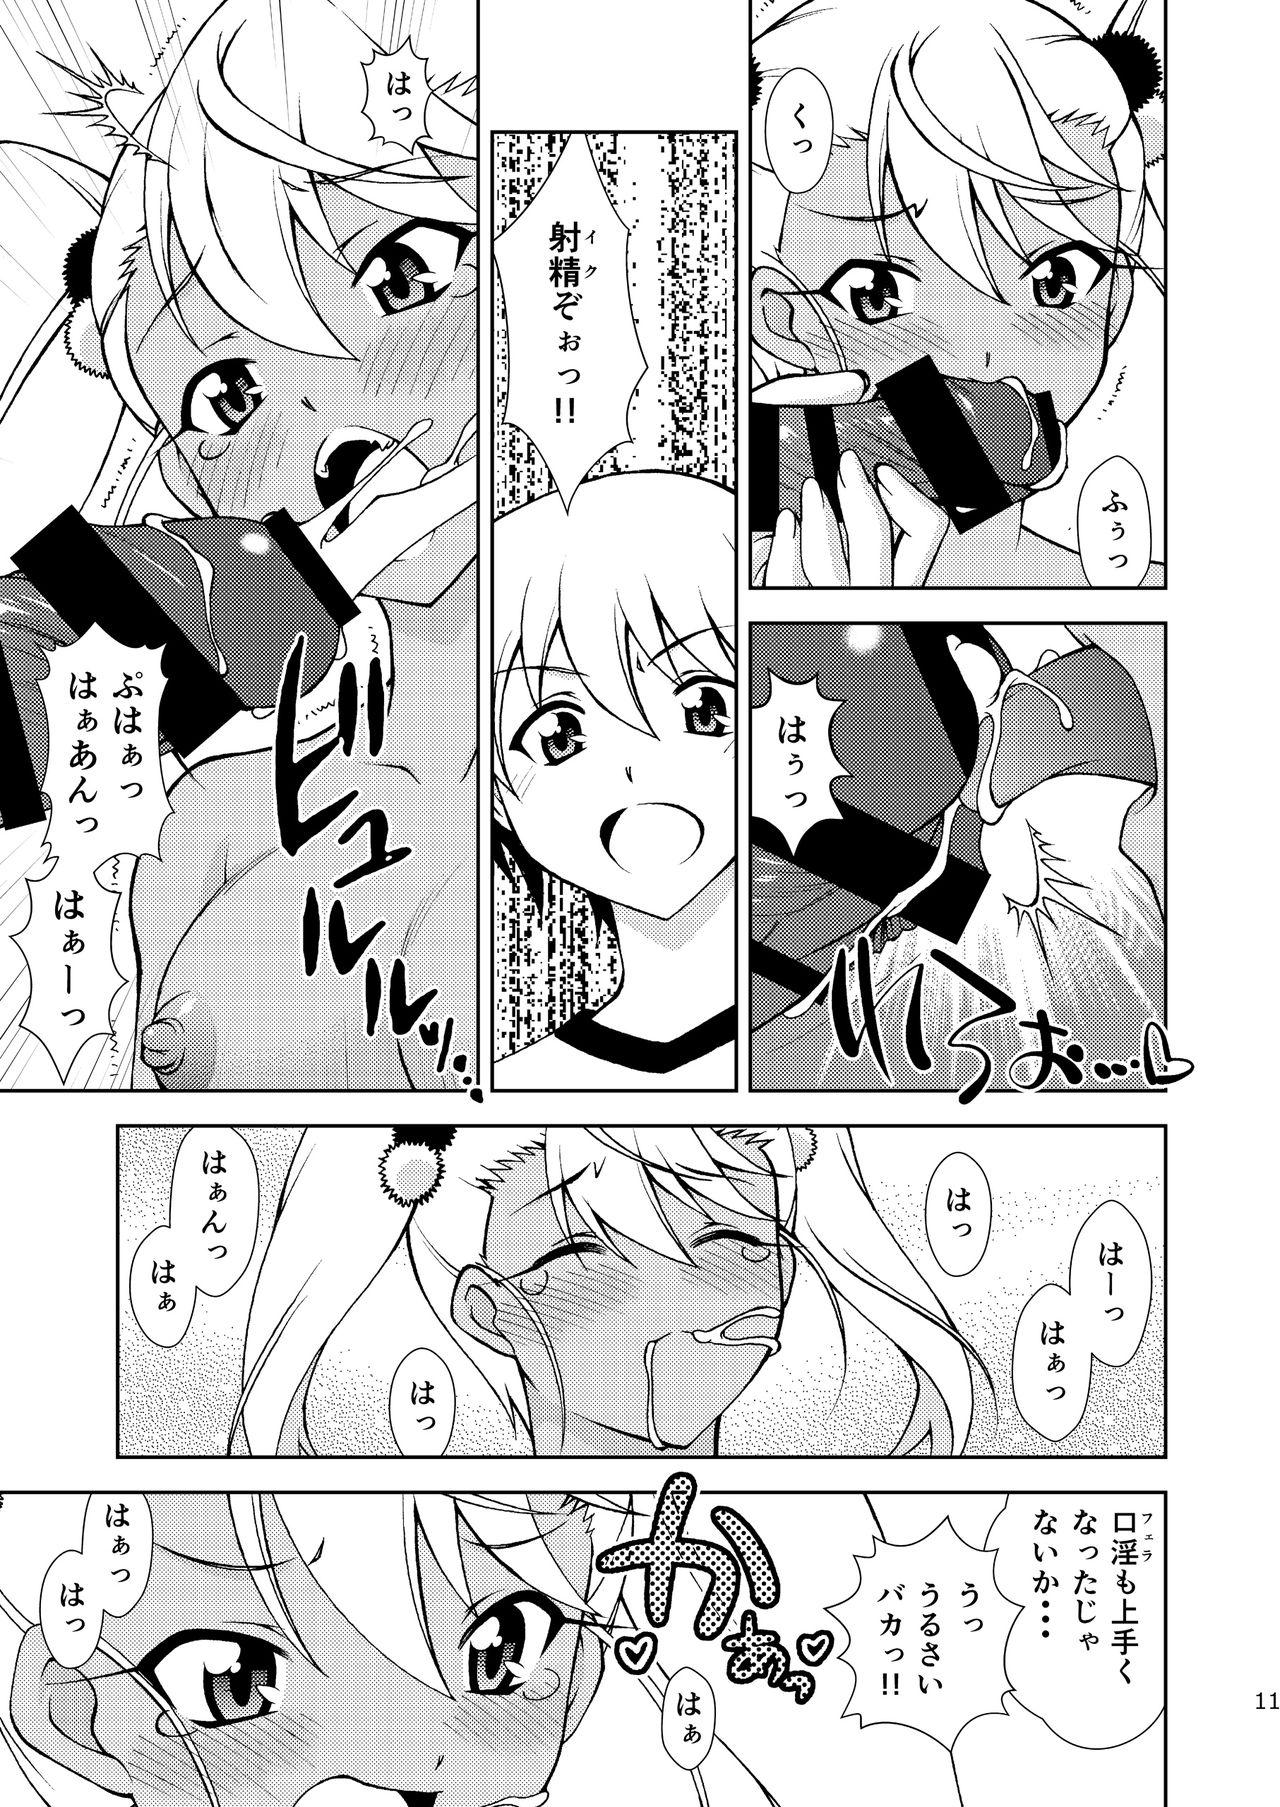 Best Blowjobs Ever The Kissing Bandit - Fate kaleid liner prisma illya Masturbating - Page 11